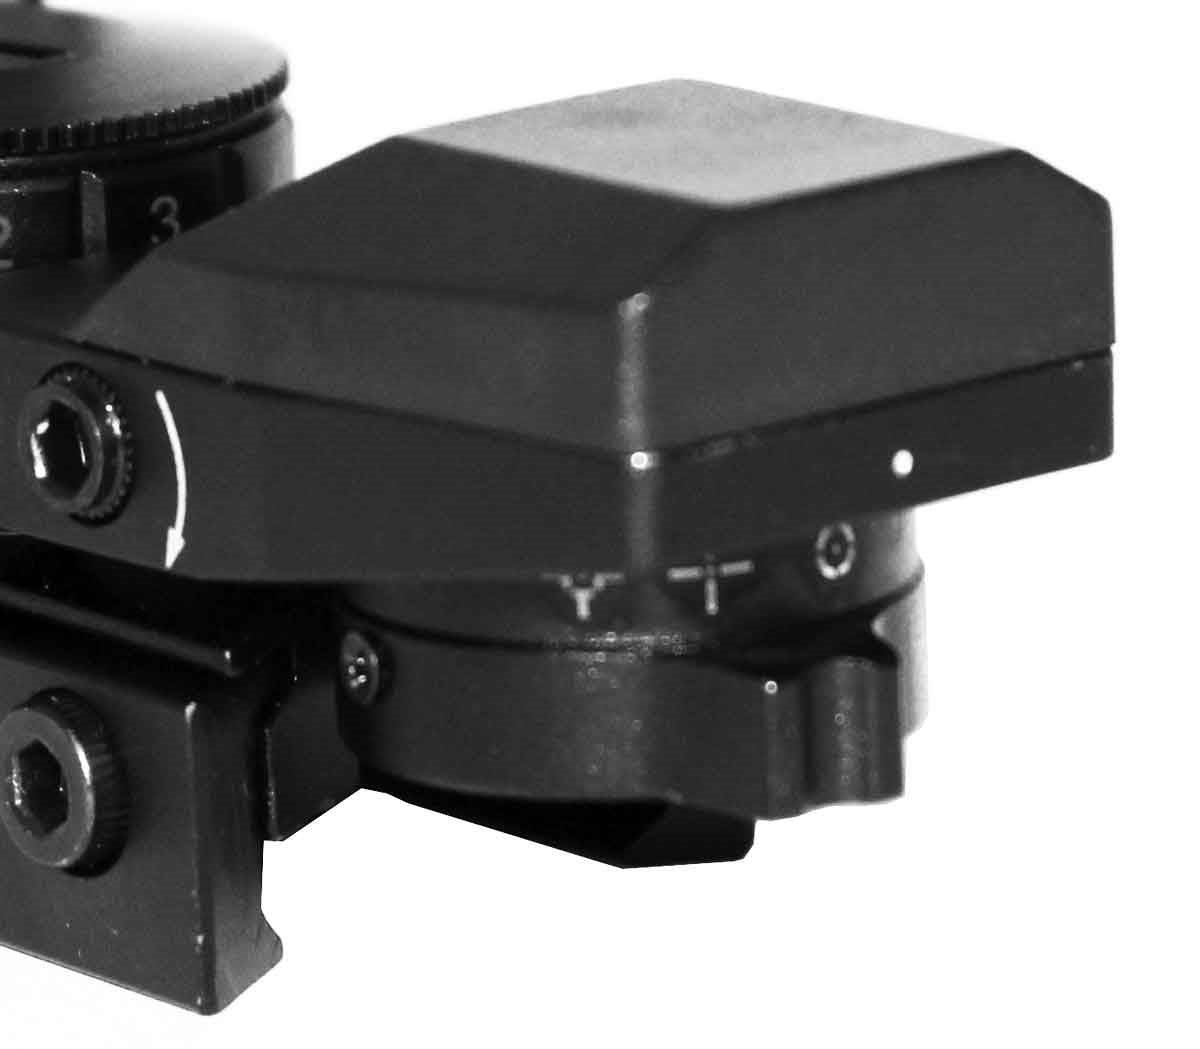 reflex sight  for ruger mini 14 rifle.